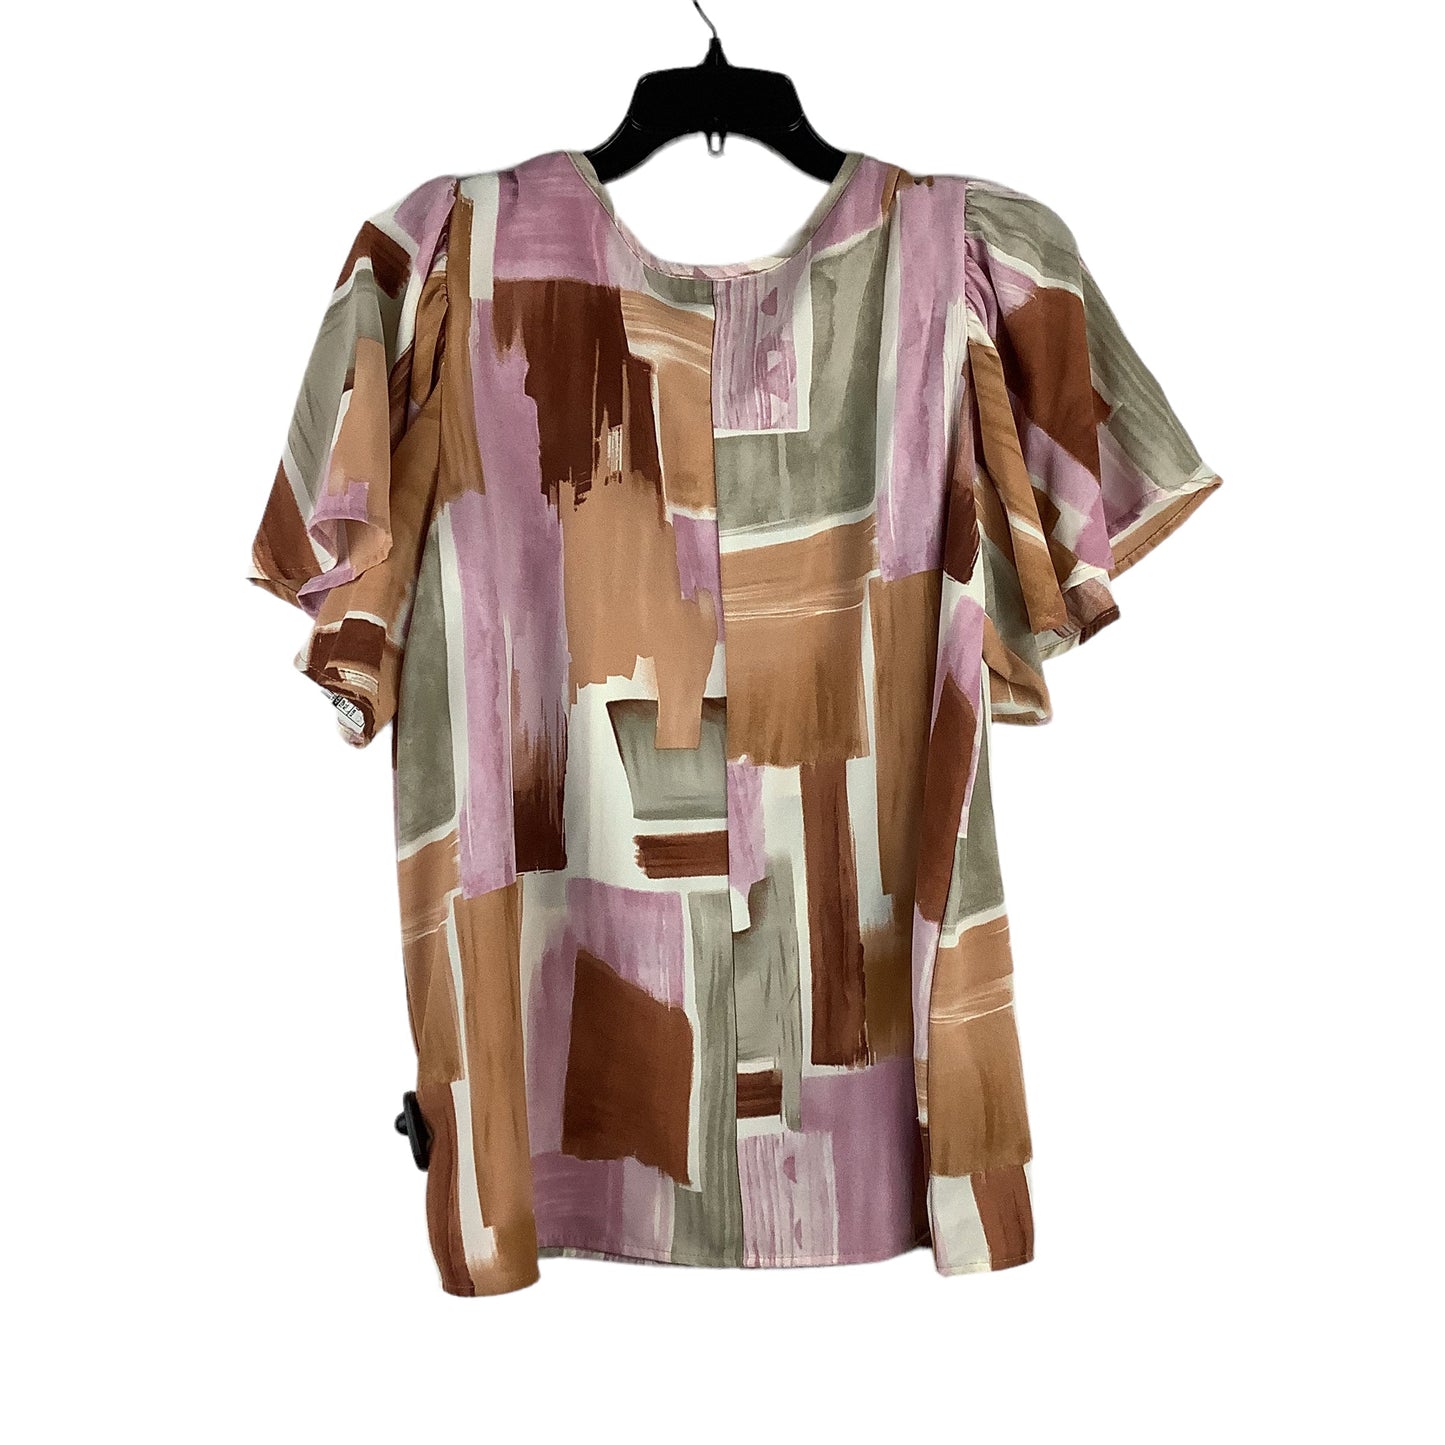 Top Short Sleeve By Entro  Size: L